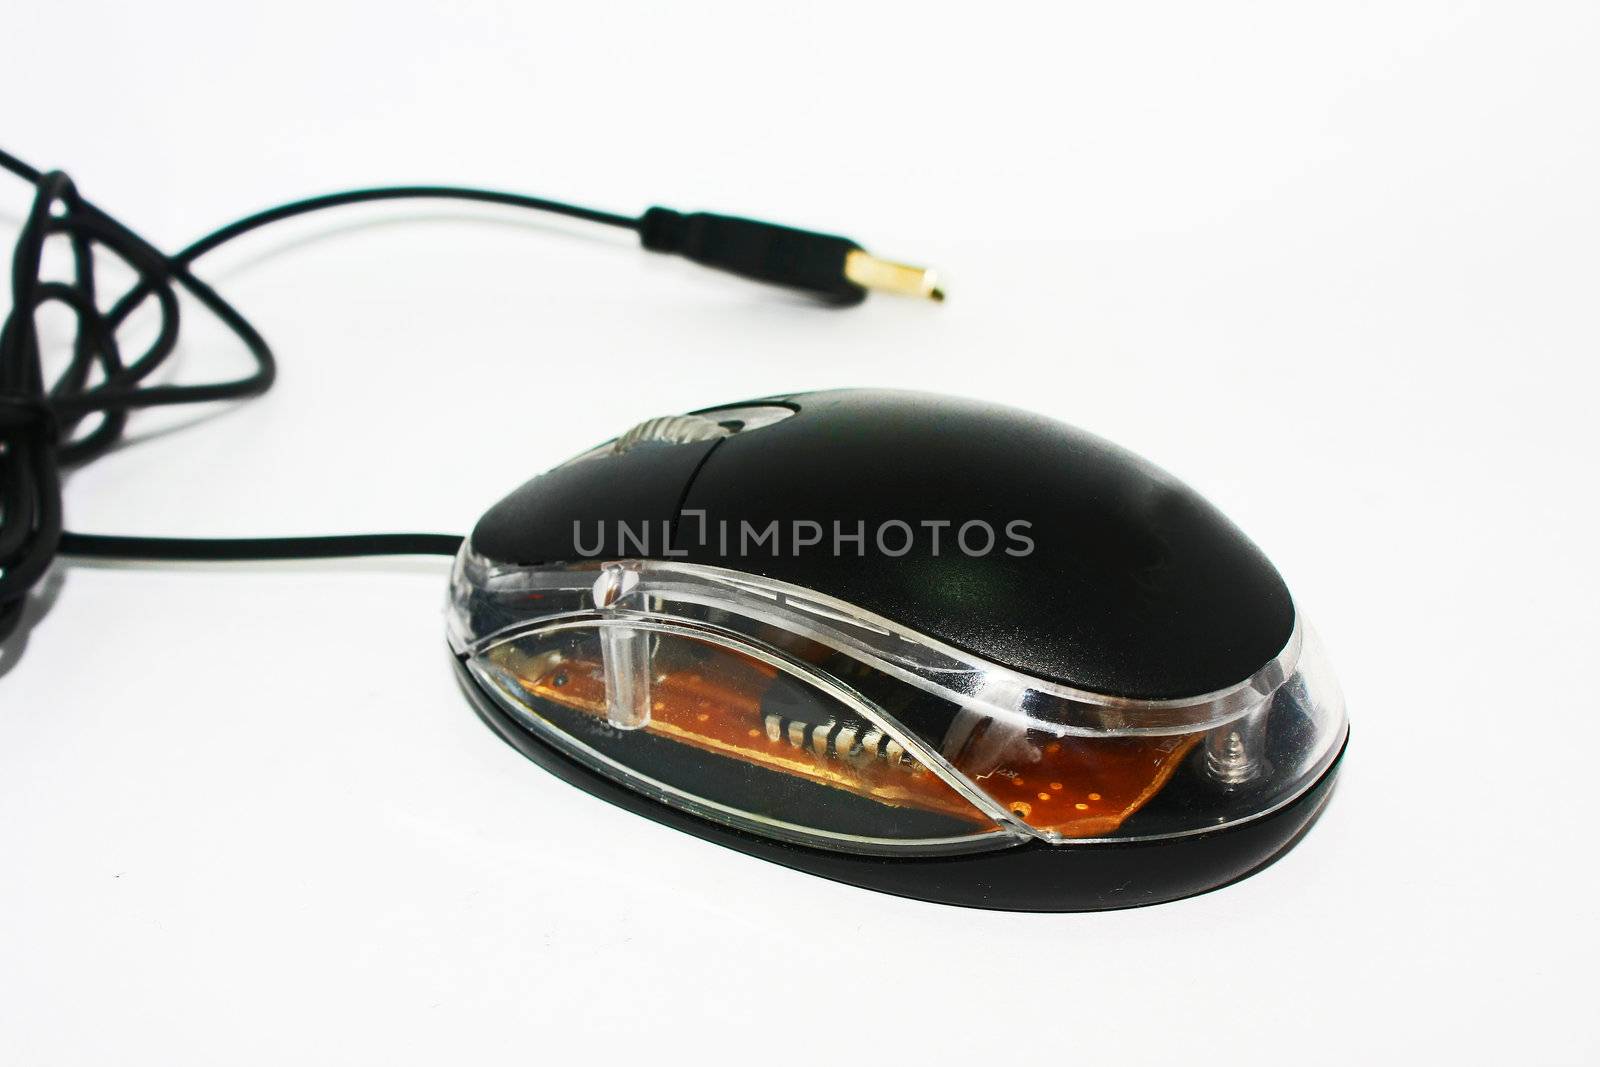 An isolated black mouse with USB cable.